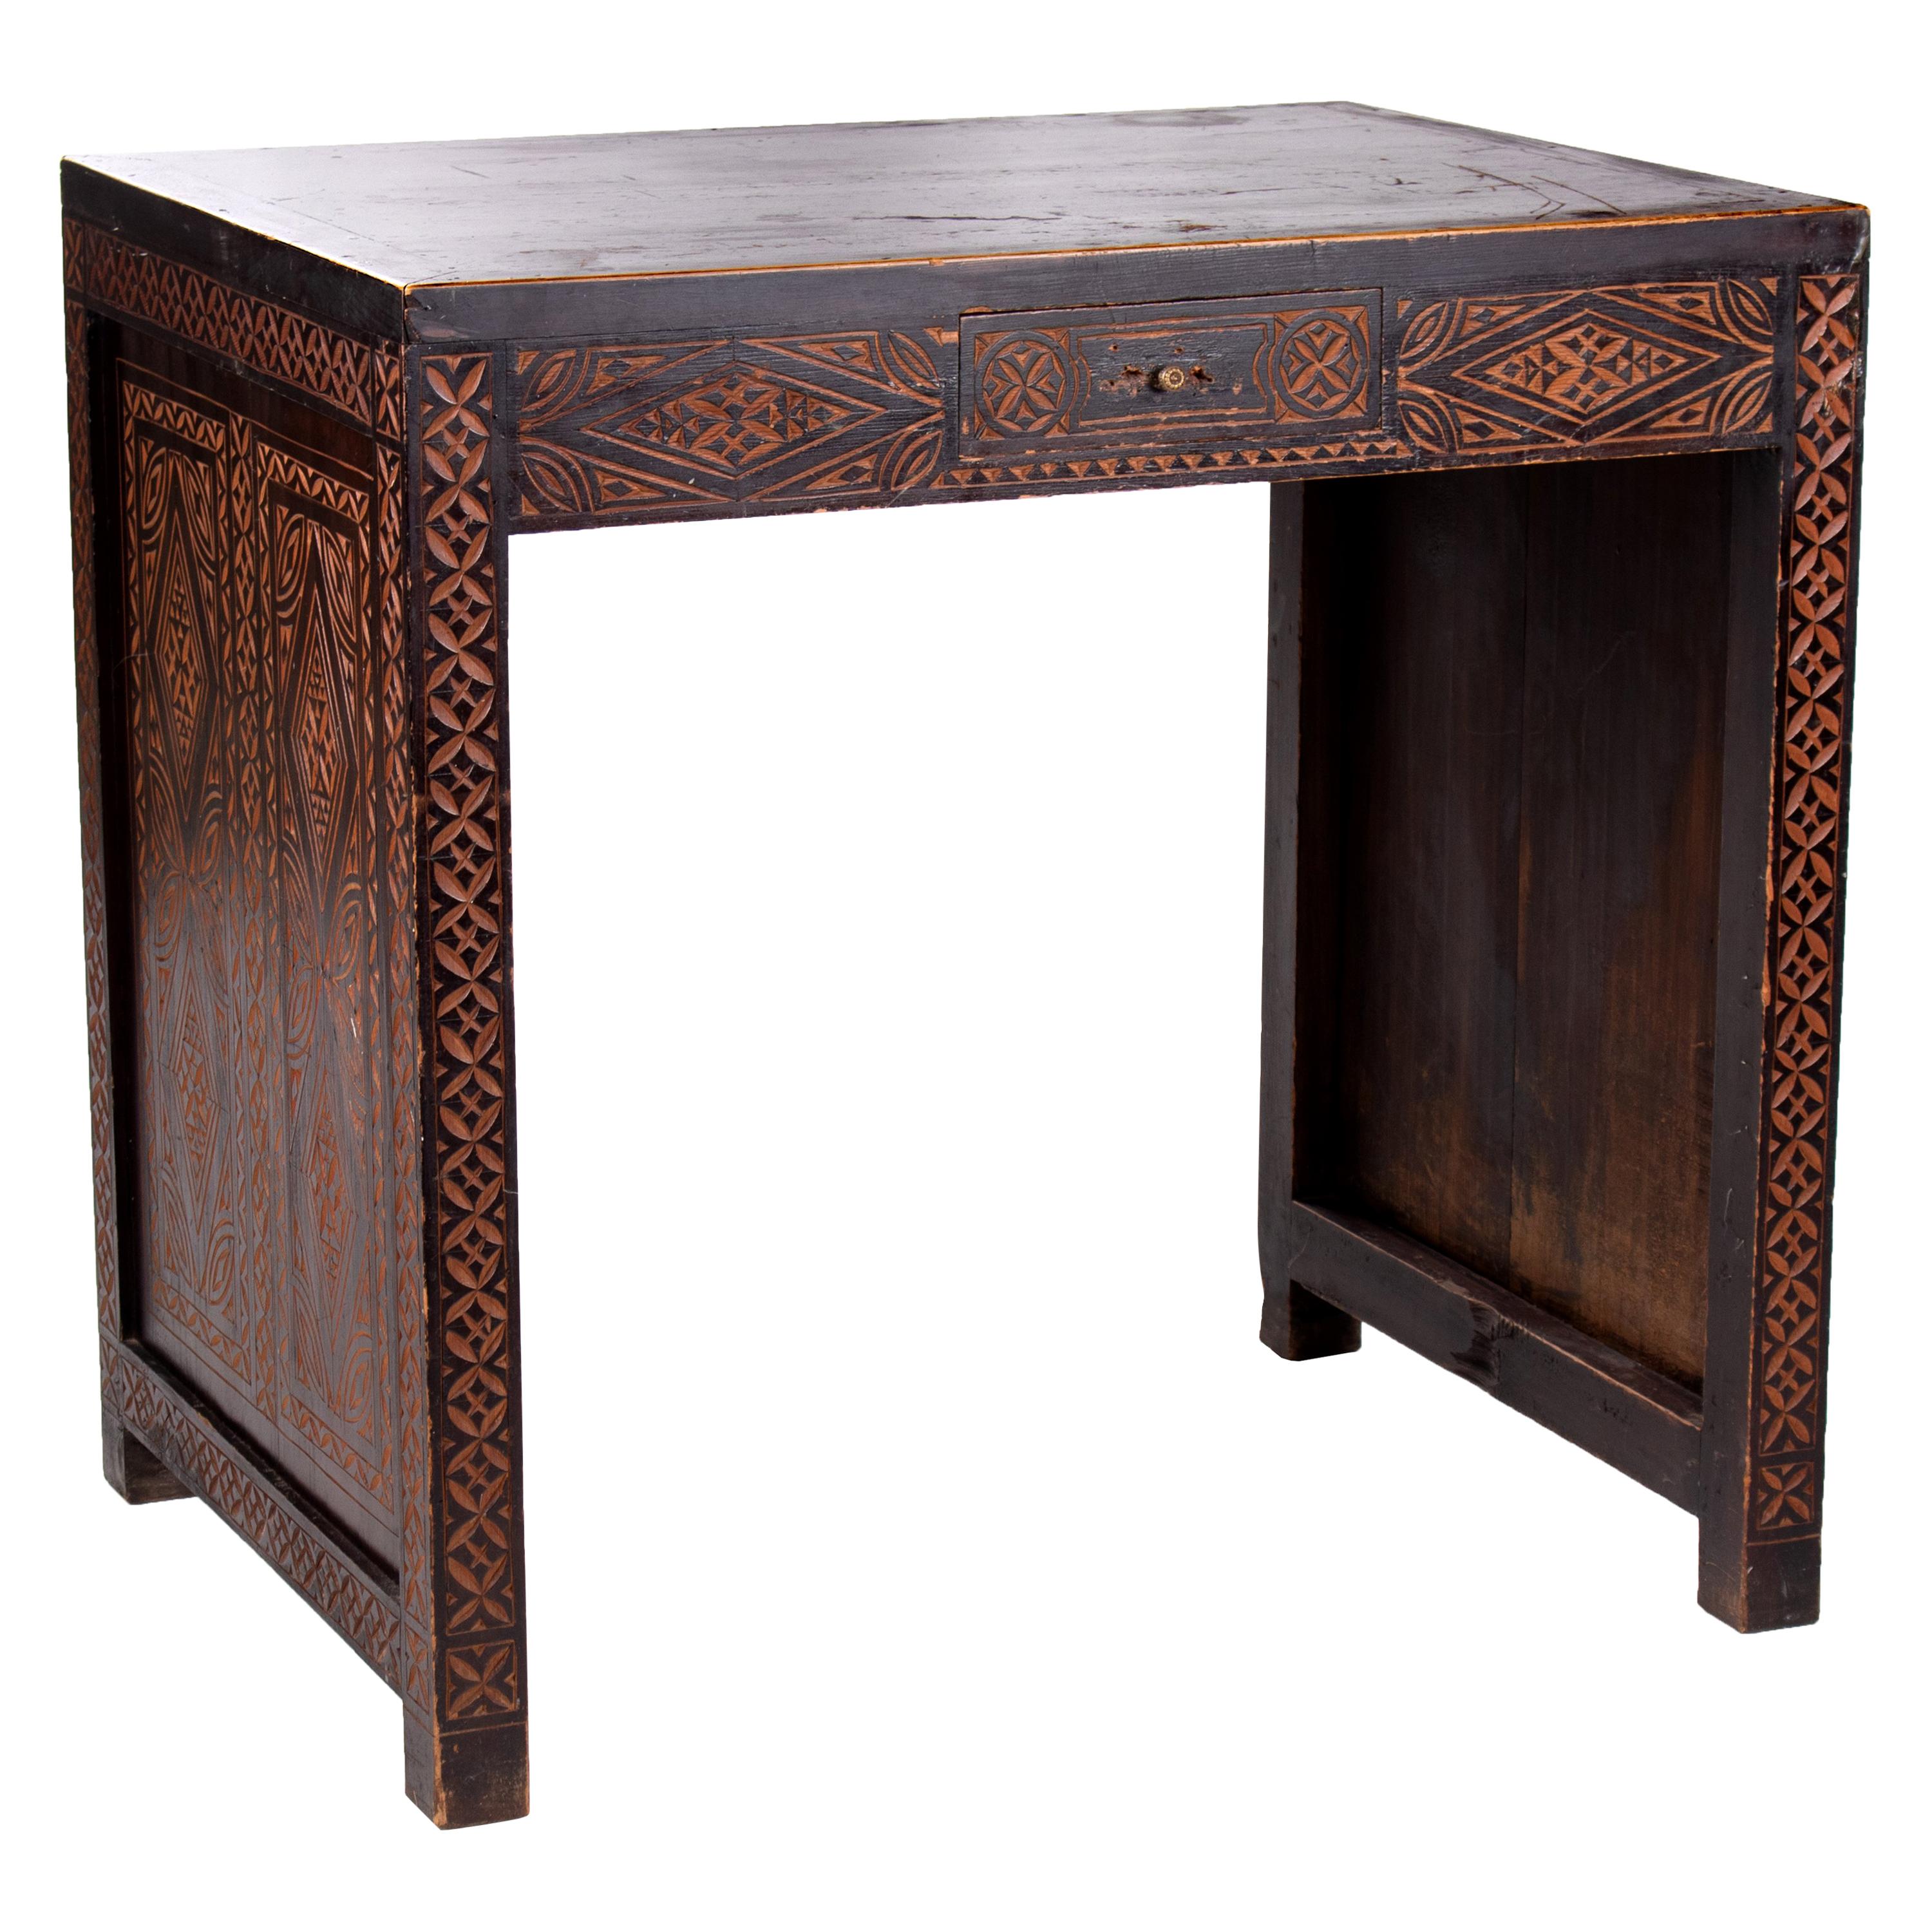 1930s Turkish Hand Carved Wooden Single Drawer Table